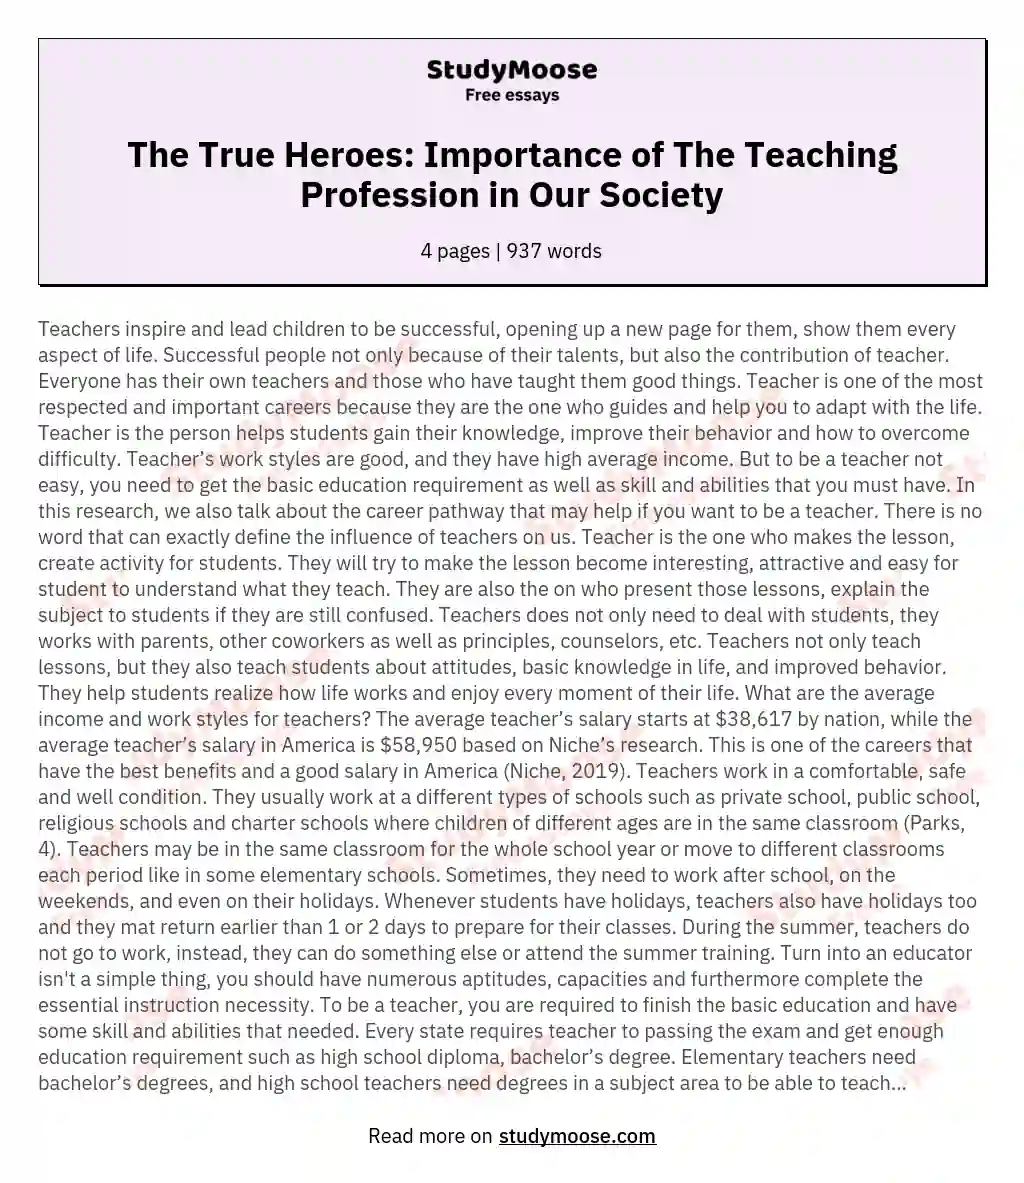 The True Heroes: Importance of The Teaching Profession in Our Society essay